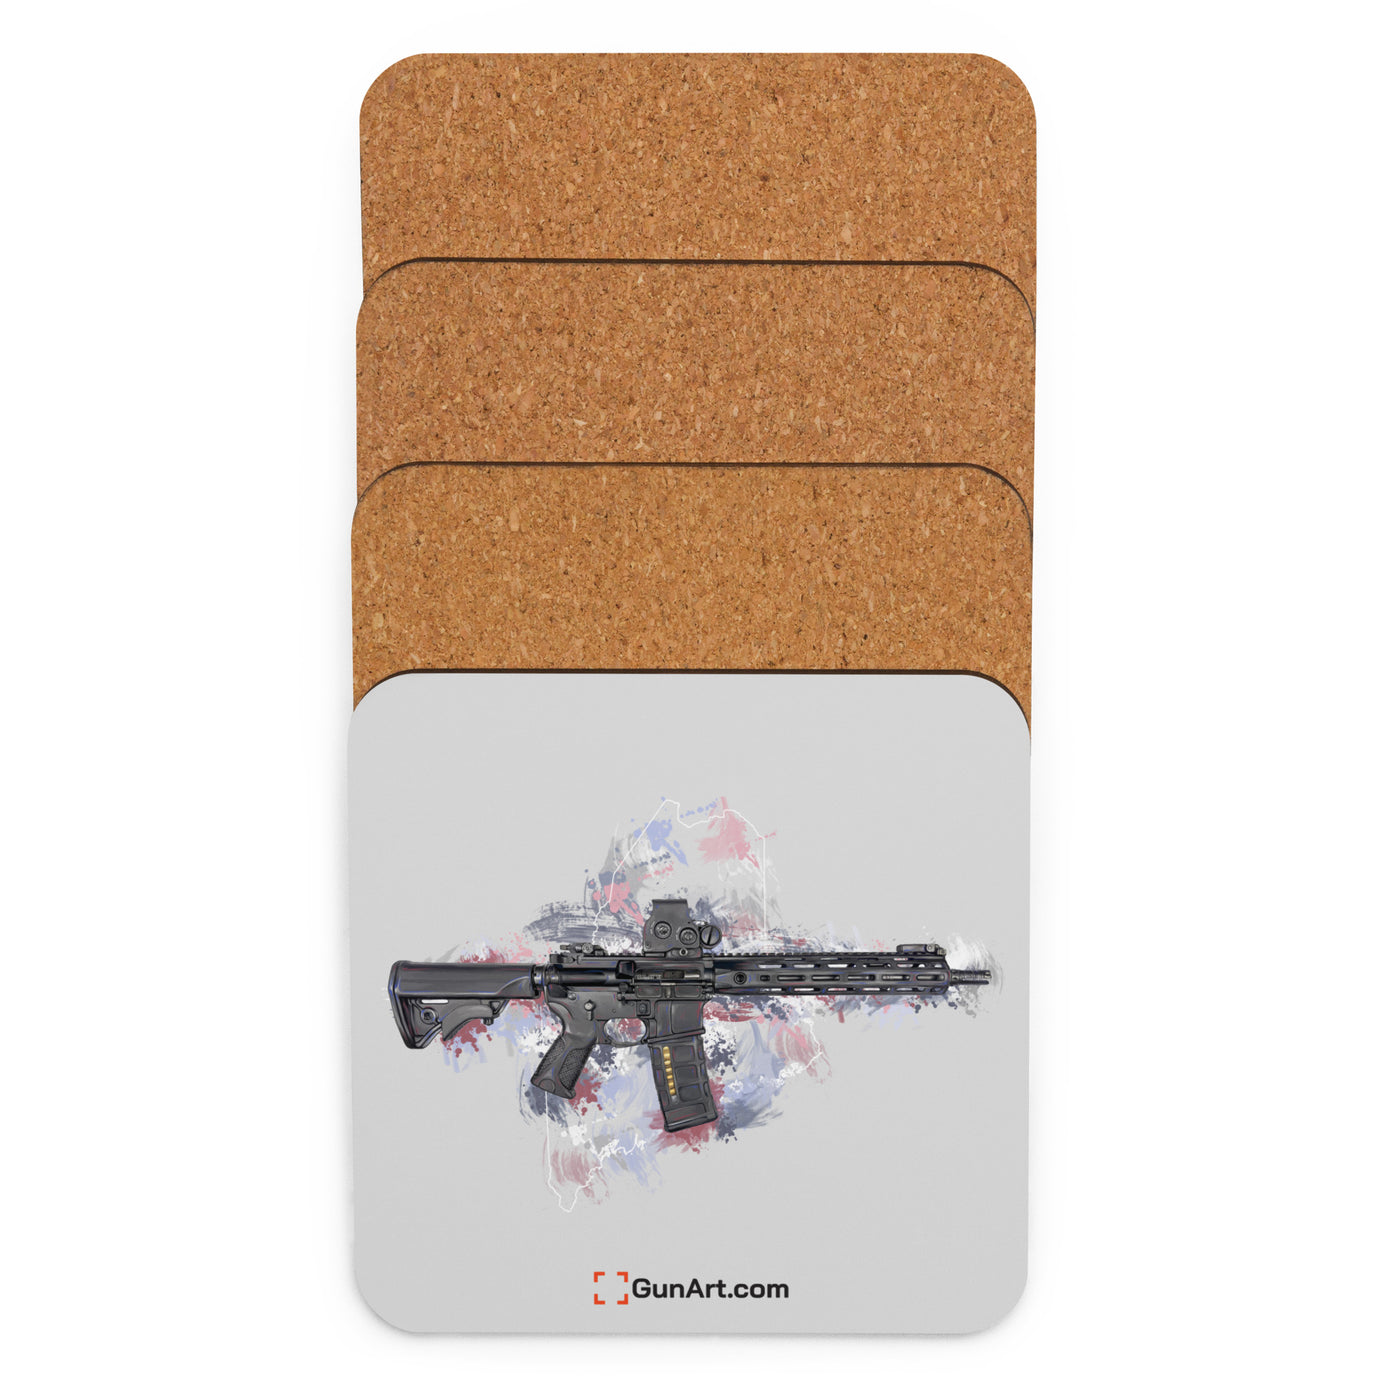 Defending Freedom - Maine - AR-15 State Cork-back Coaster - White State